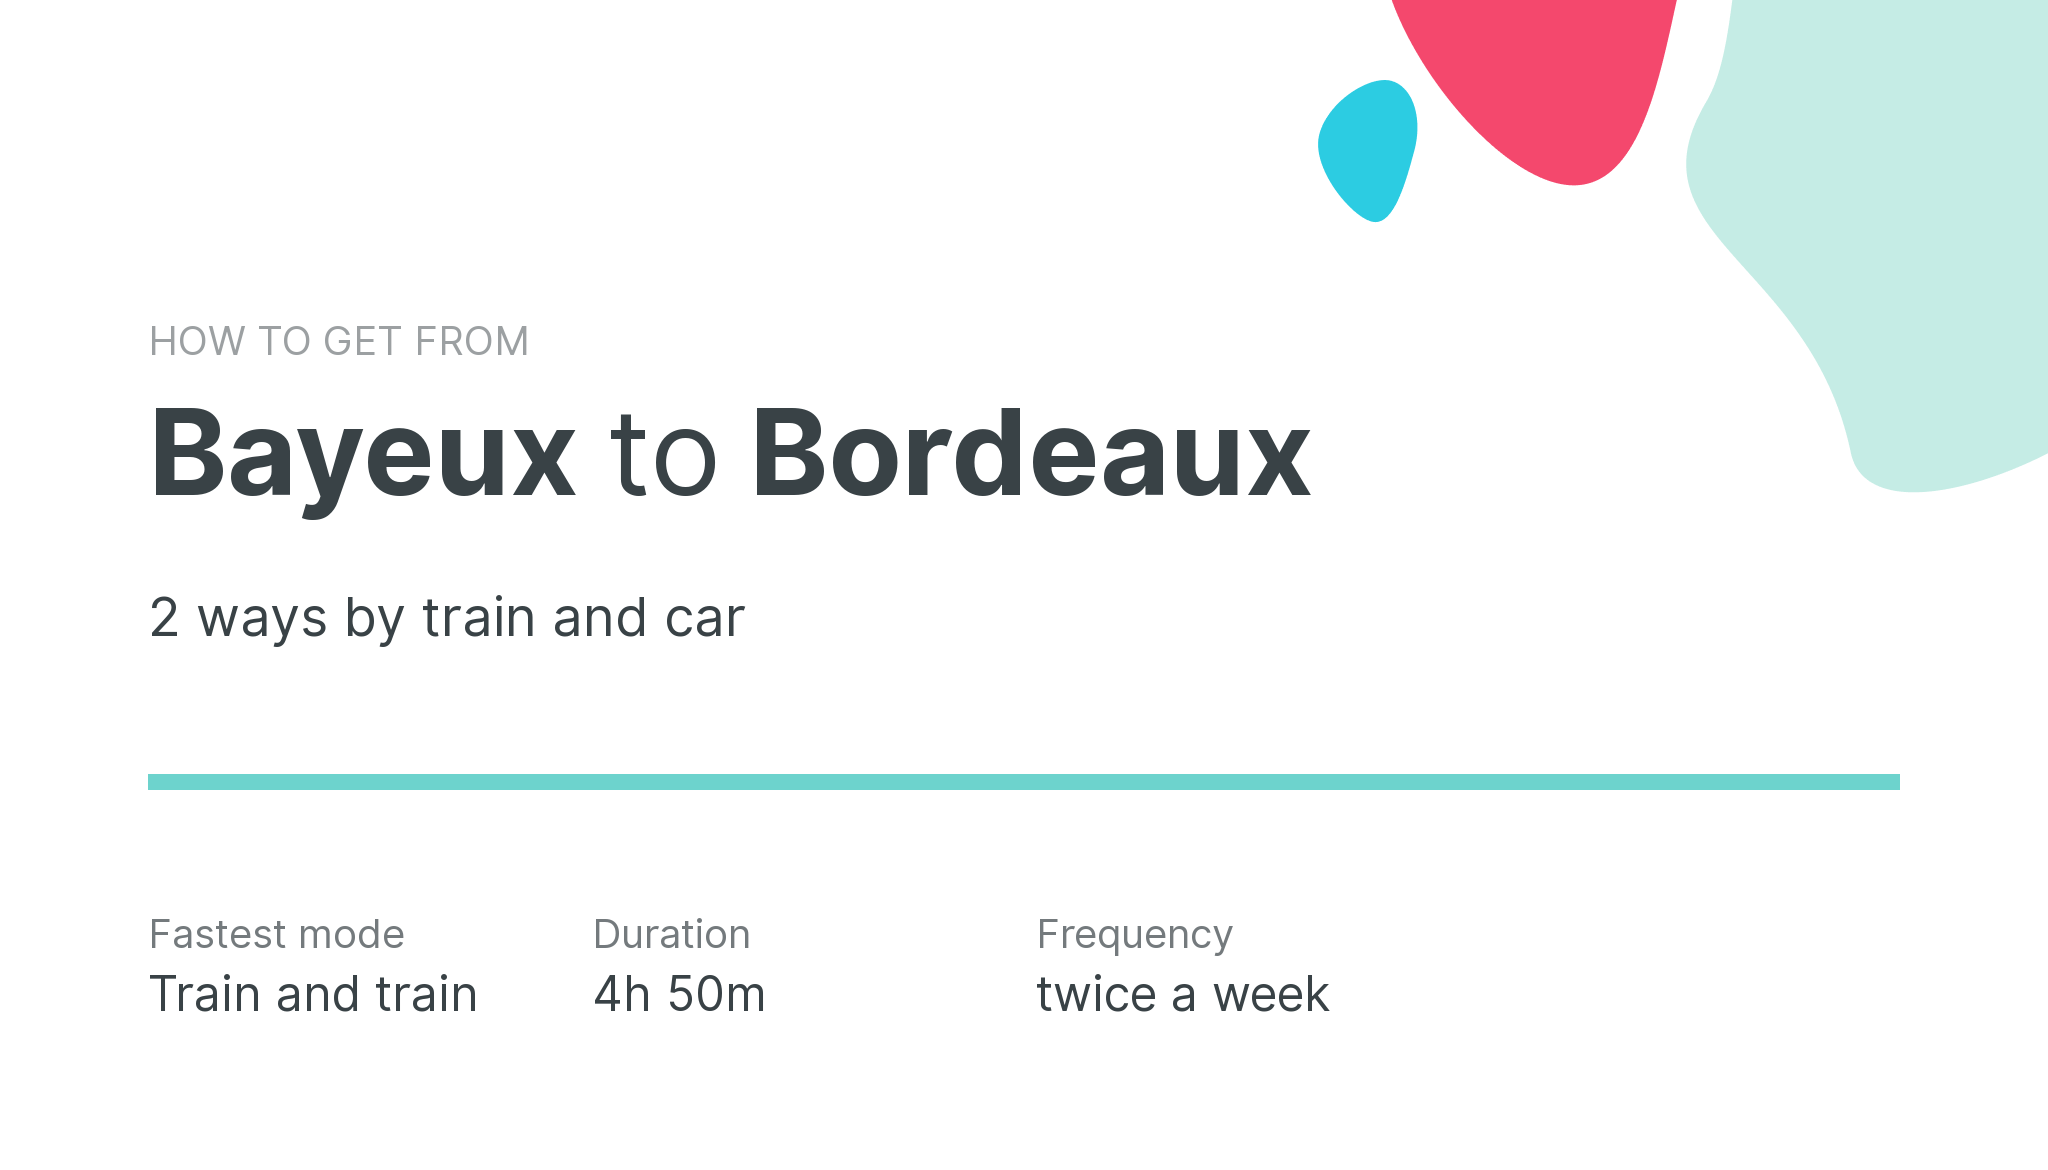 How do I get from Bayeux to Bordeaux